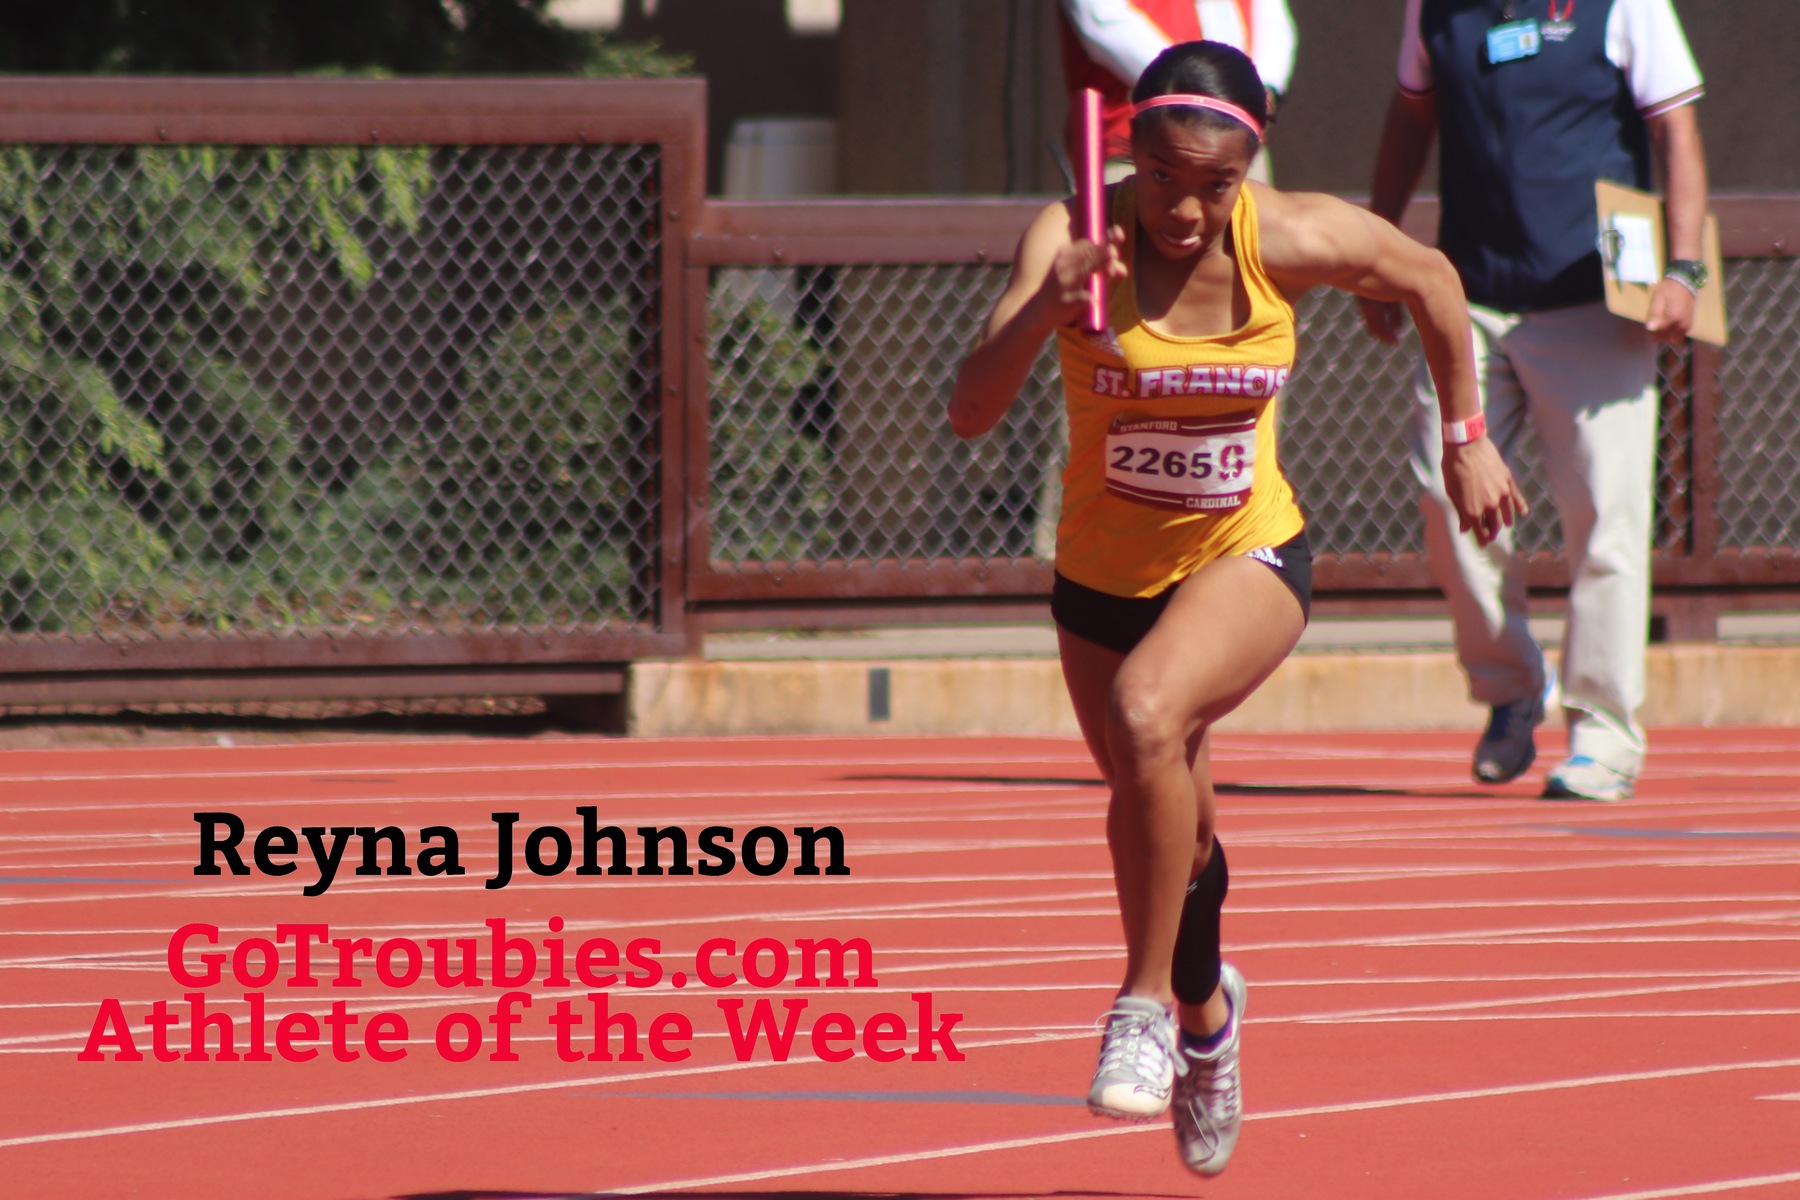 Track and Field’s Reyna Johnson is named the GoTroubies.com Athlete for the Week of March 25 - April 1